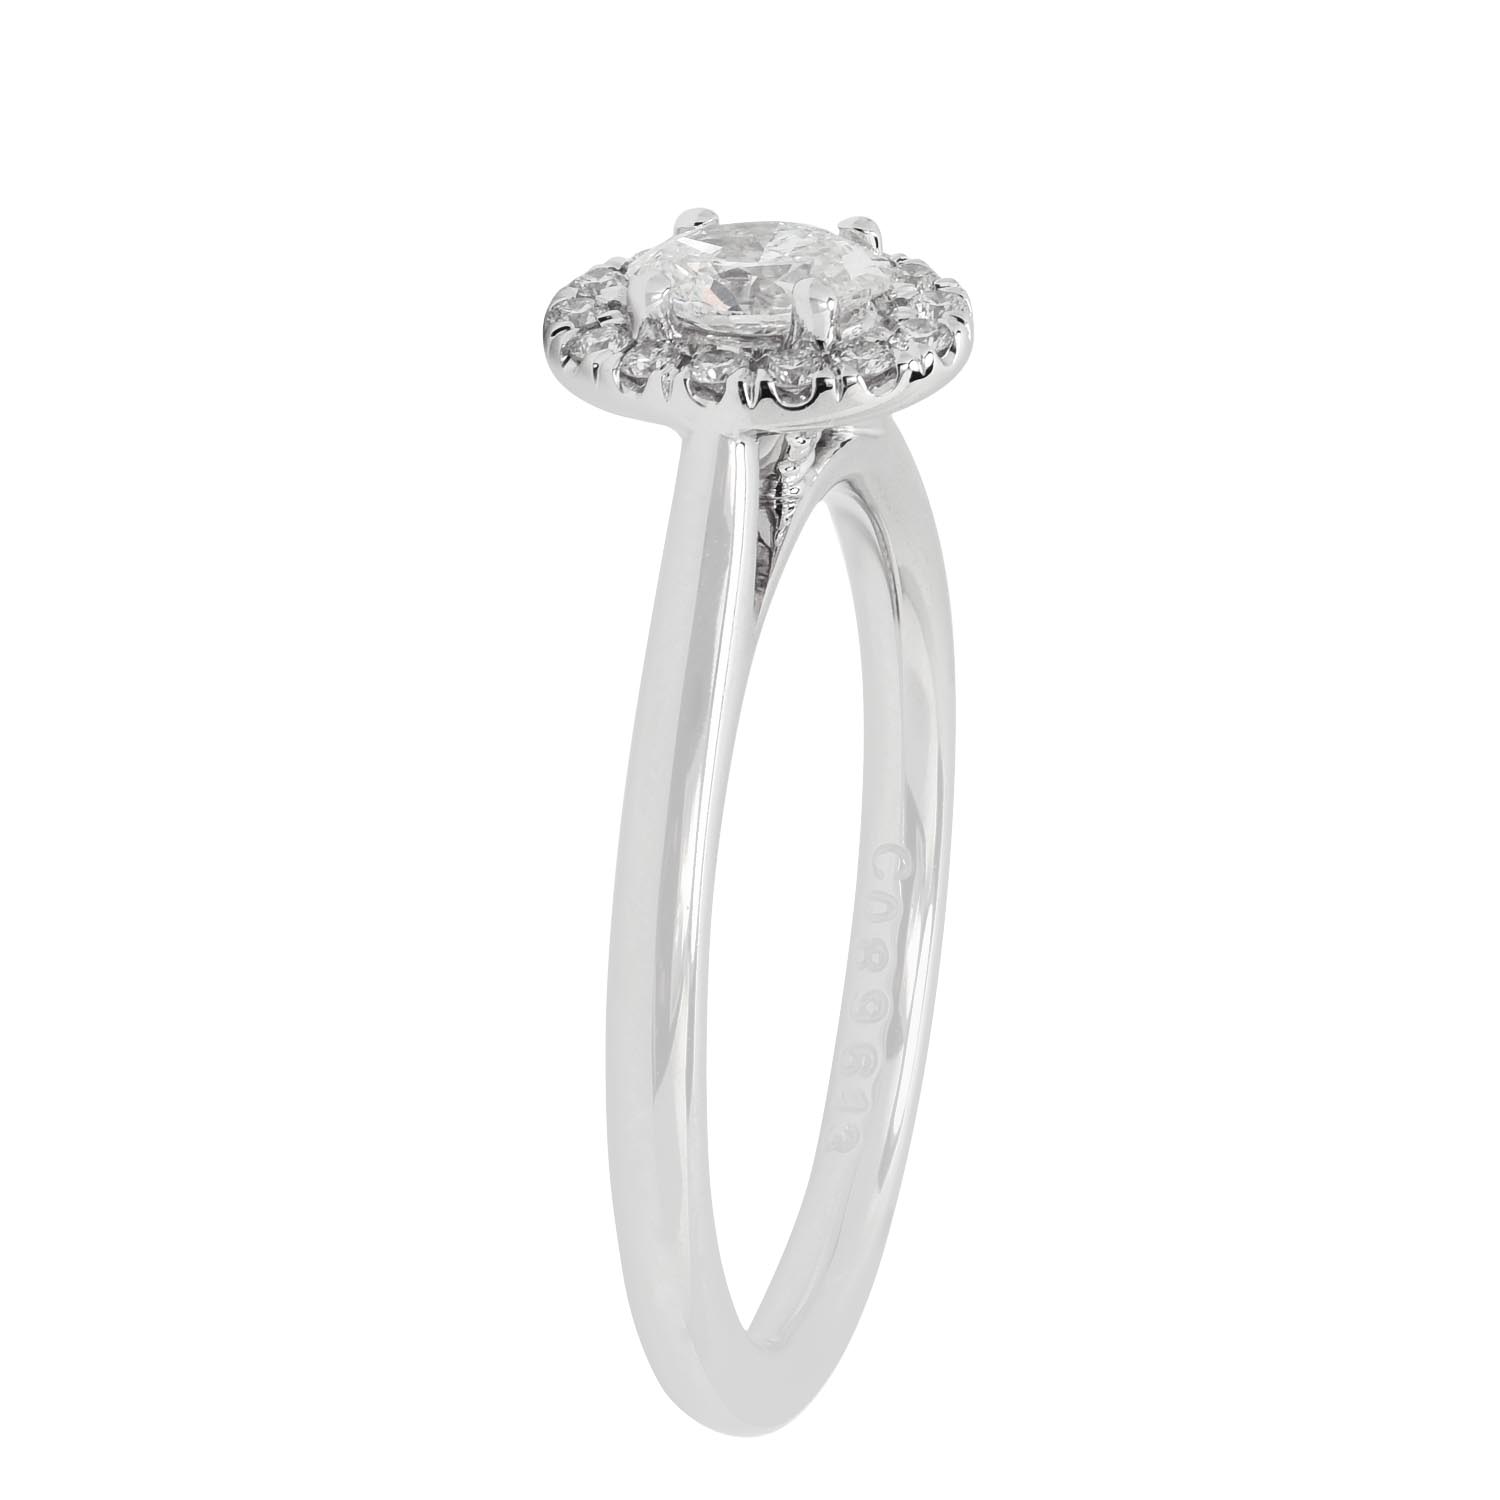 Martin Flyer Oval Diamond Halo Engagement Ring in 14kt White Gold (3/8ct tw)